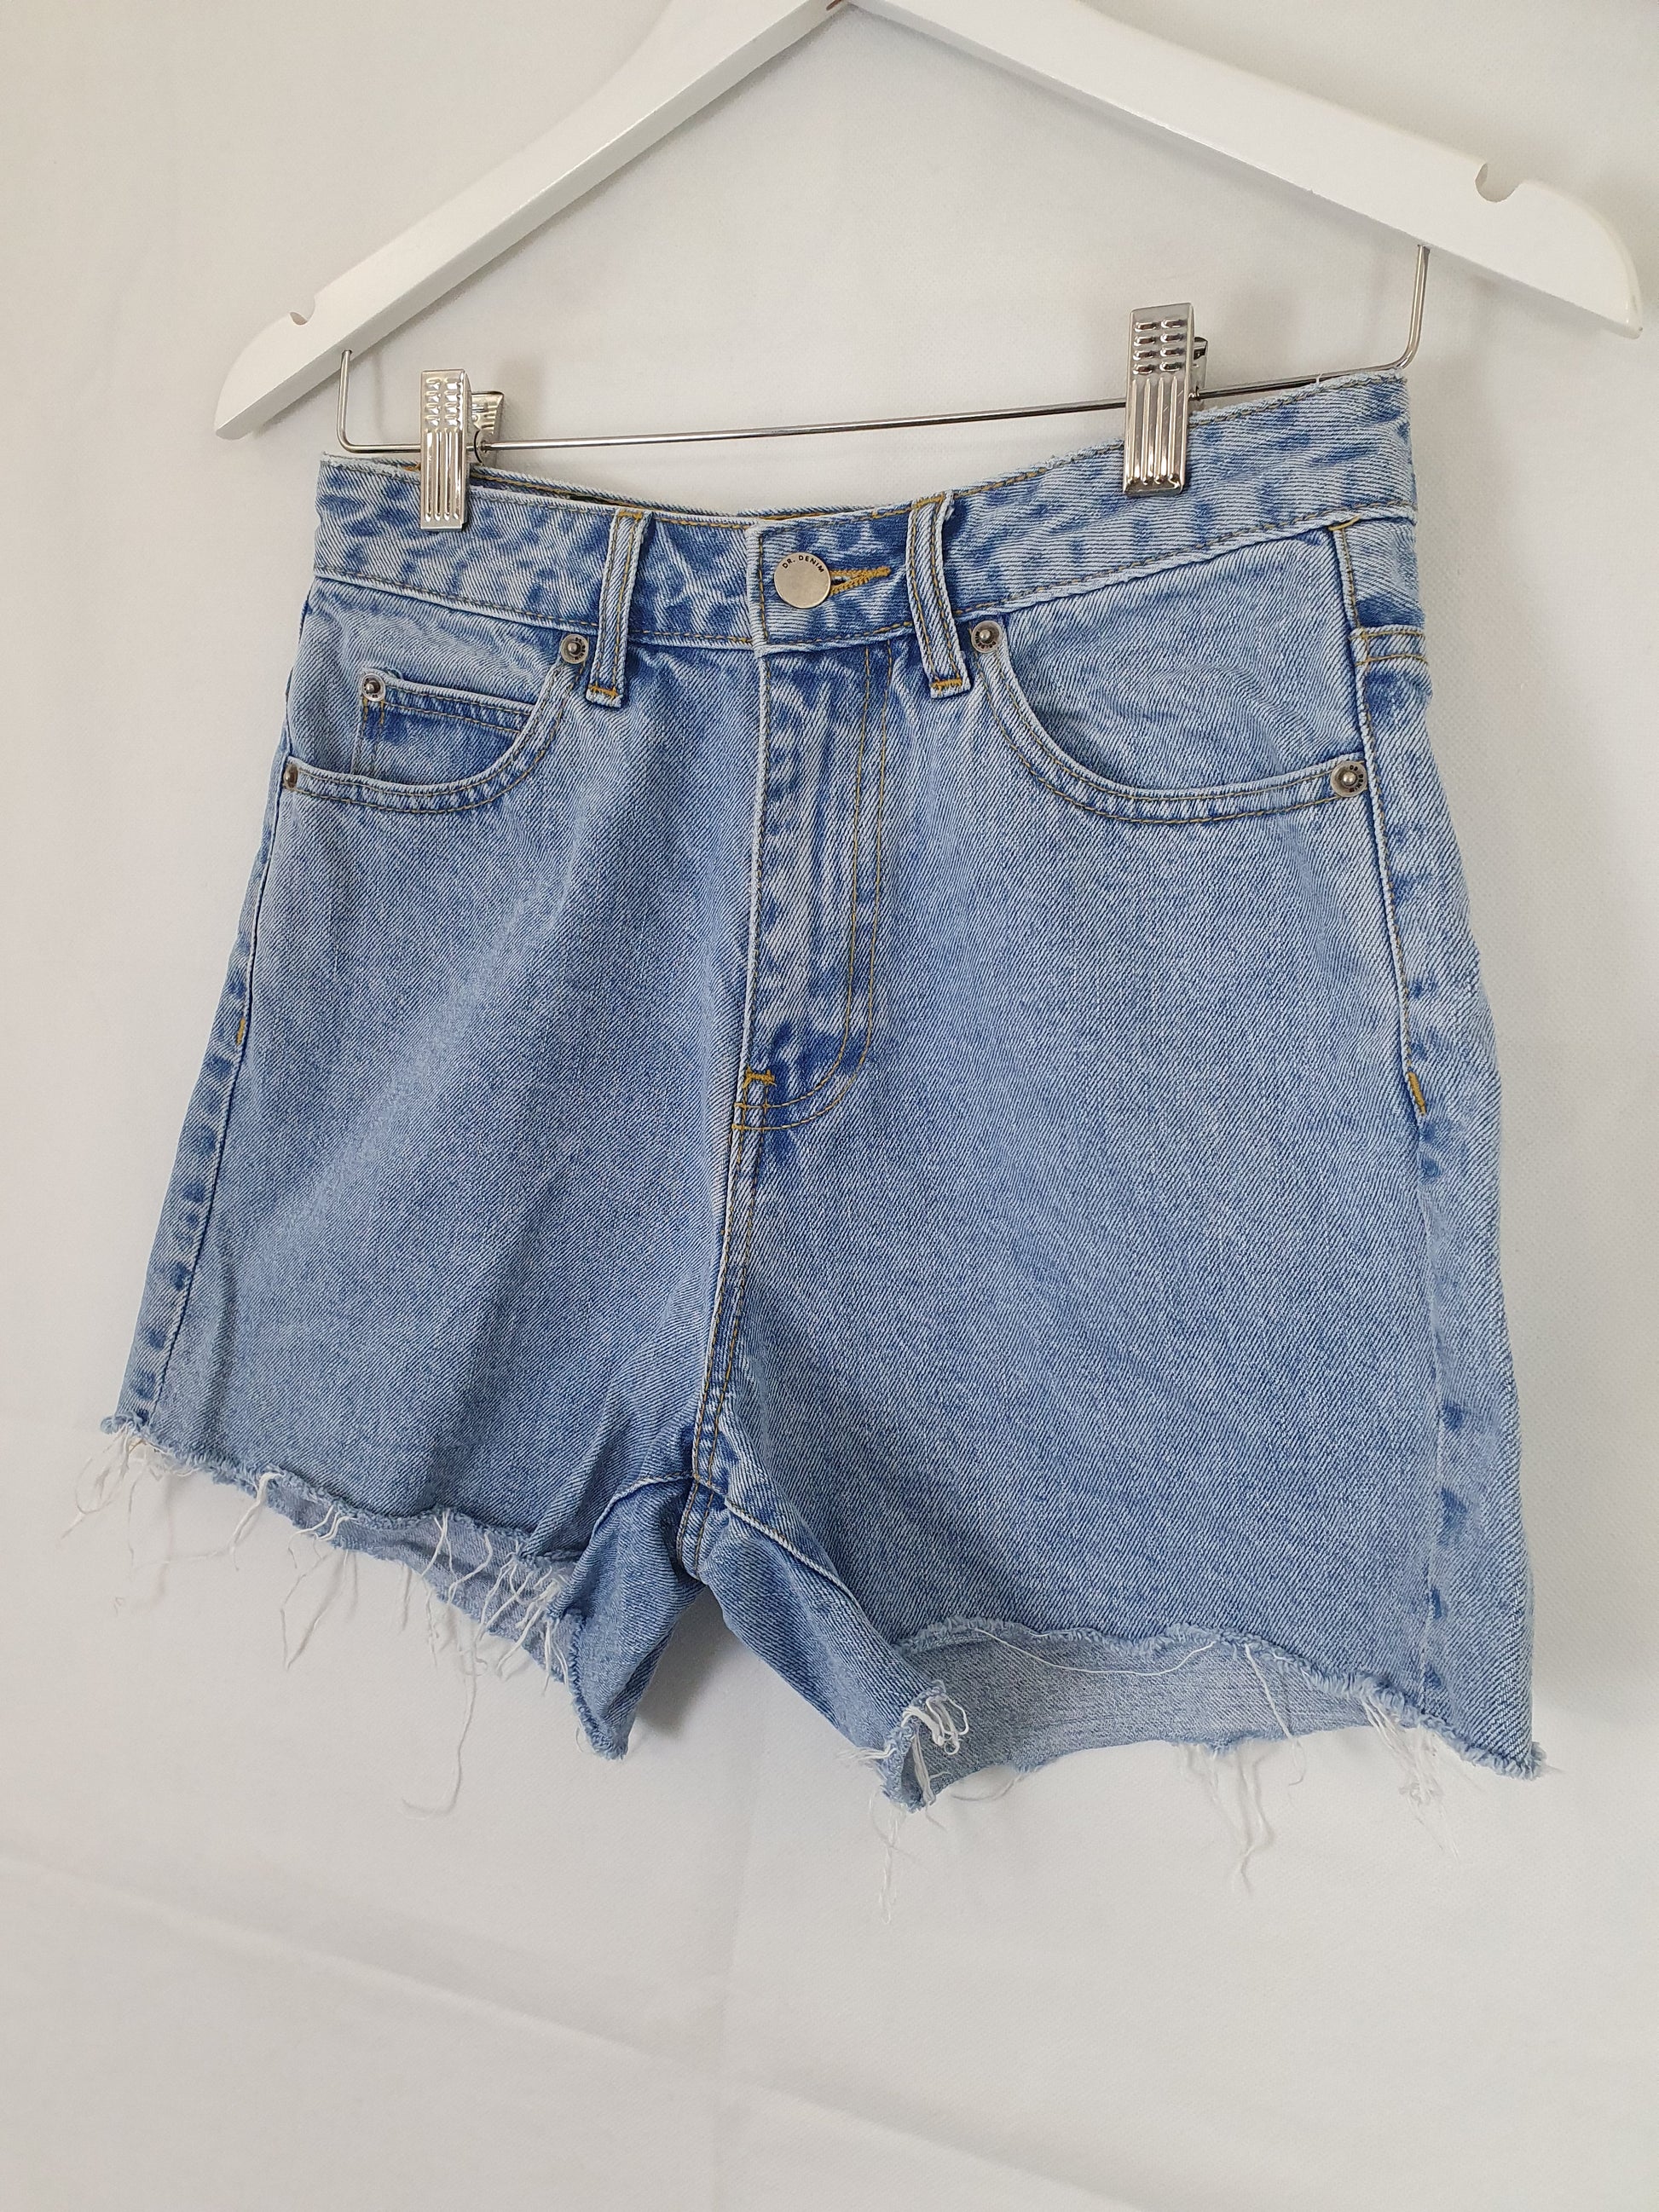 DRDENIM Frayed Cut Off Denim Shorts Size 26 by SwapUp-Online Second Hand Store-Online Thrift Store